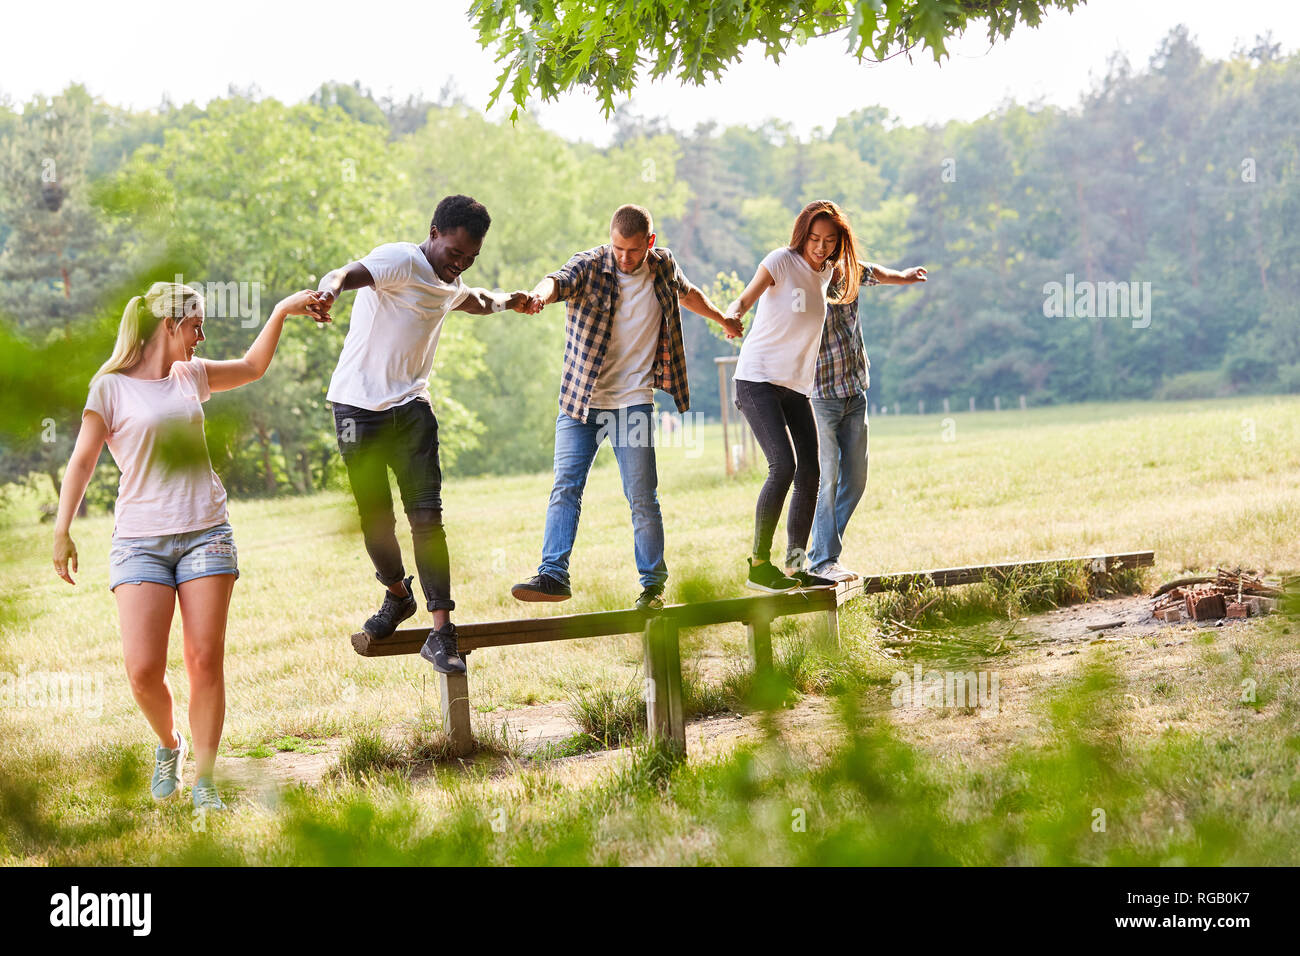 Group of young people exercises teamwork while balancing on a balance beam Stock Photo